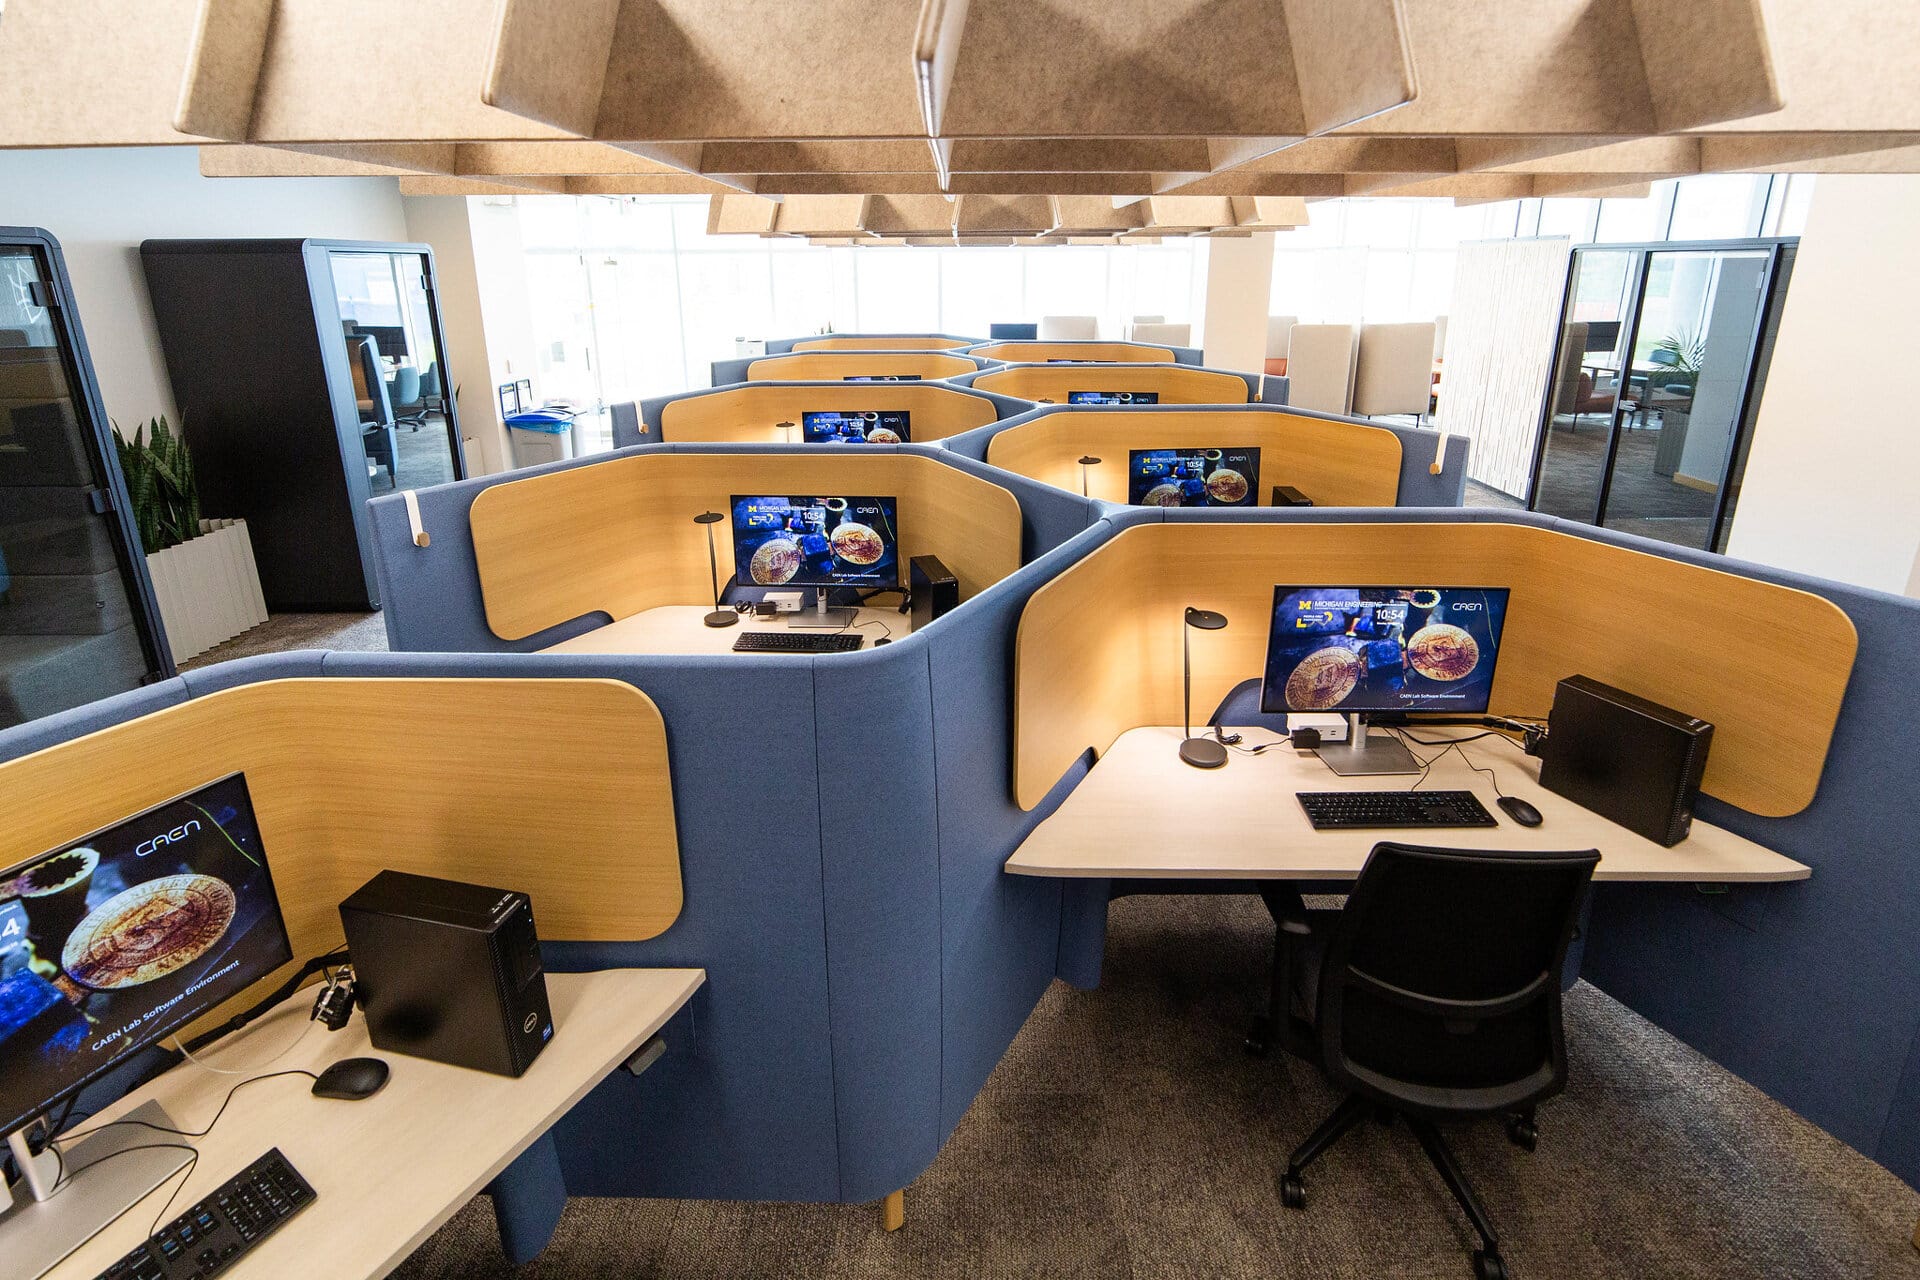 A view of the new Quiet Space lab. There are many computers at desks with dividers. There are also quiet pods around the room.